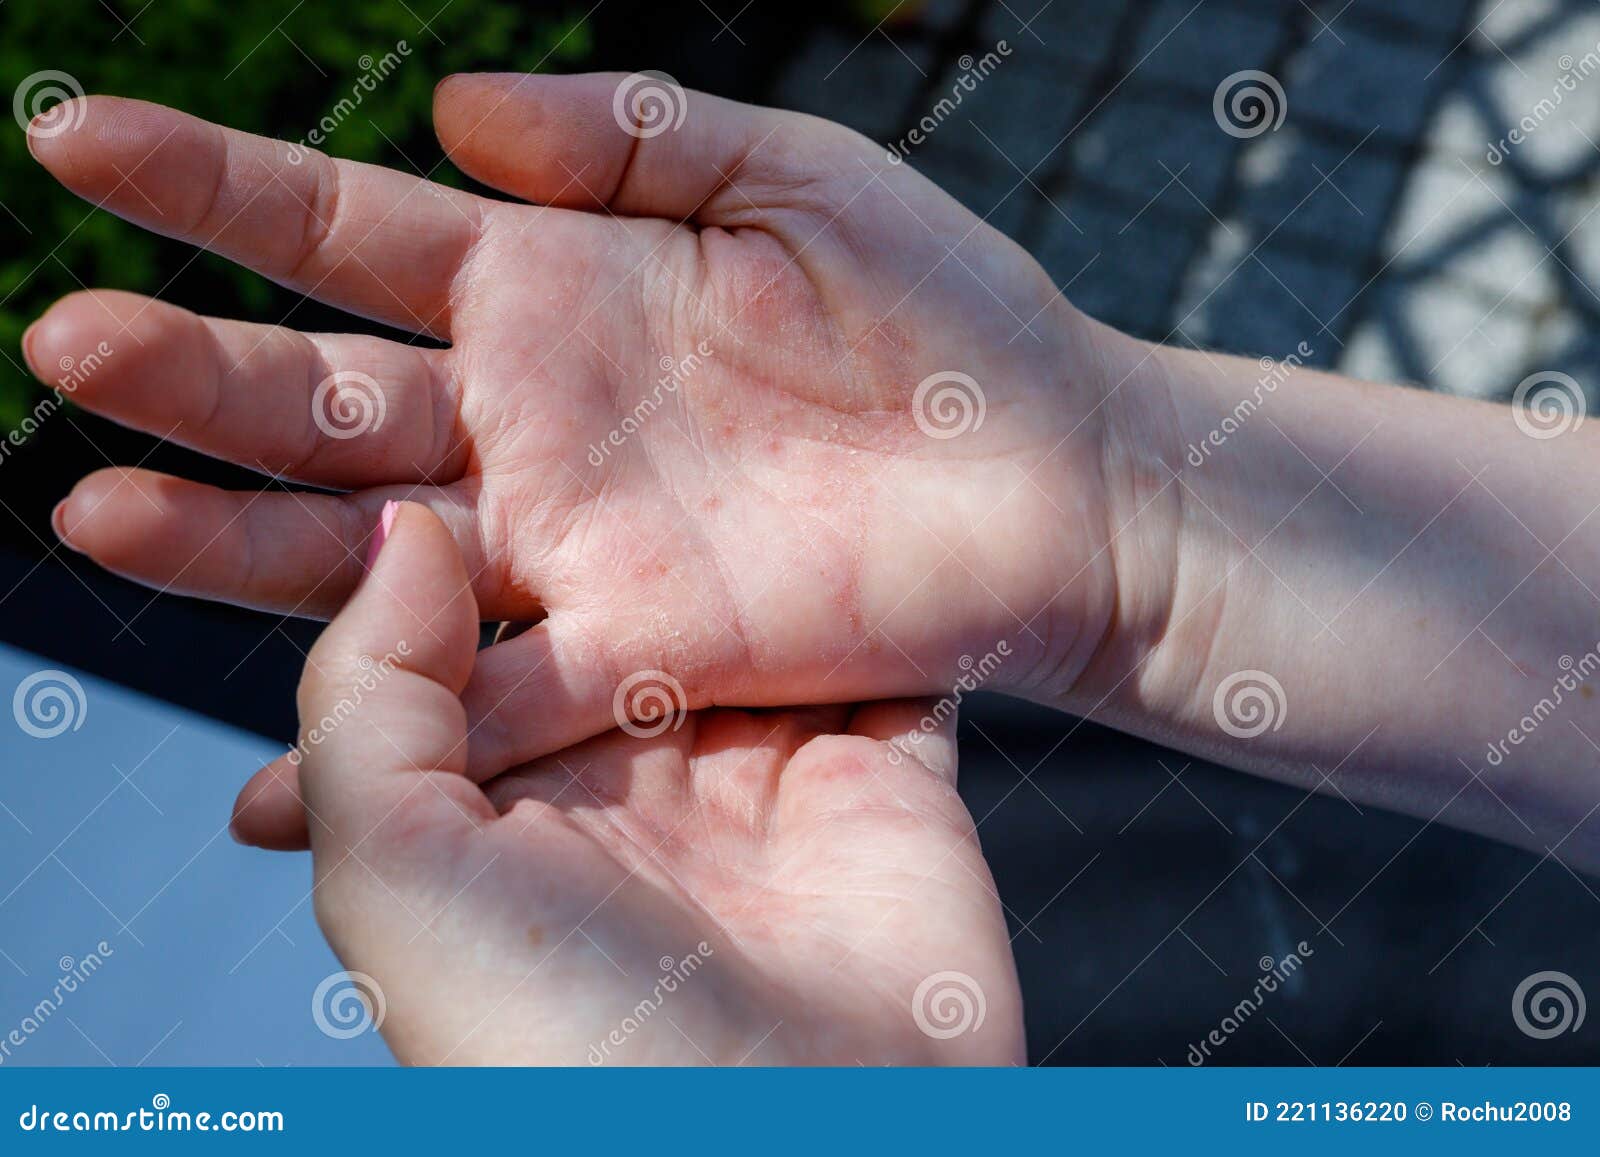 woman scratching itchy hand, concept, atopic dermatitis, red hands, dermatological problem